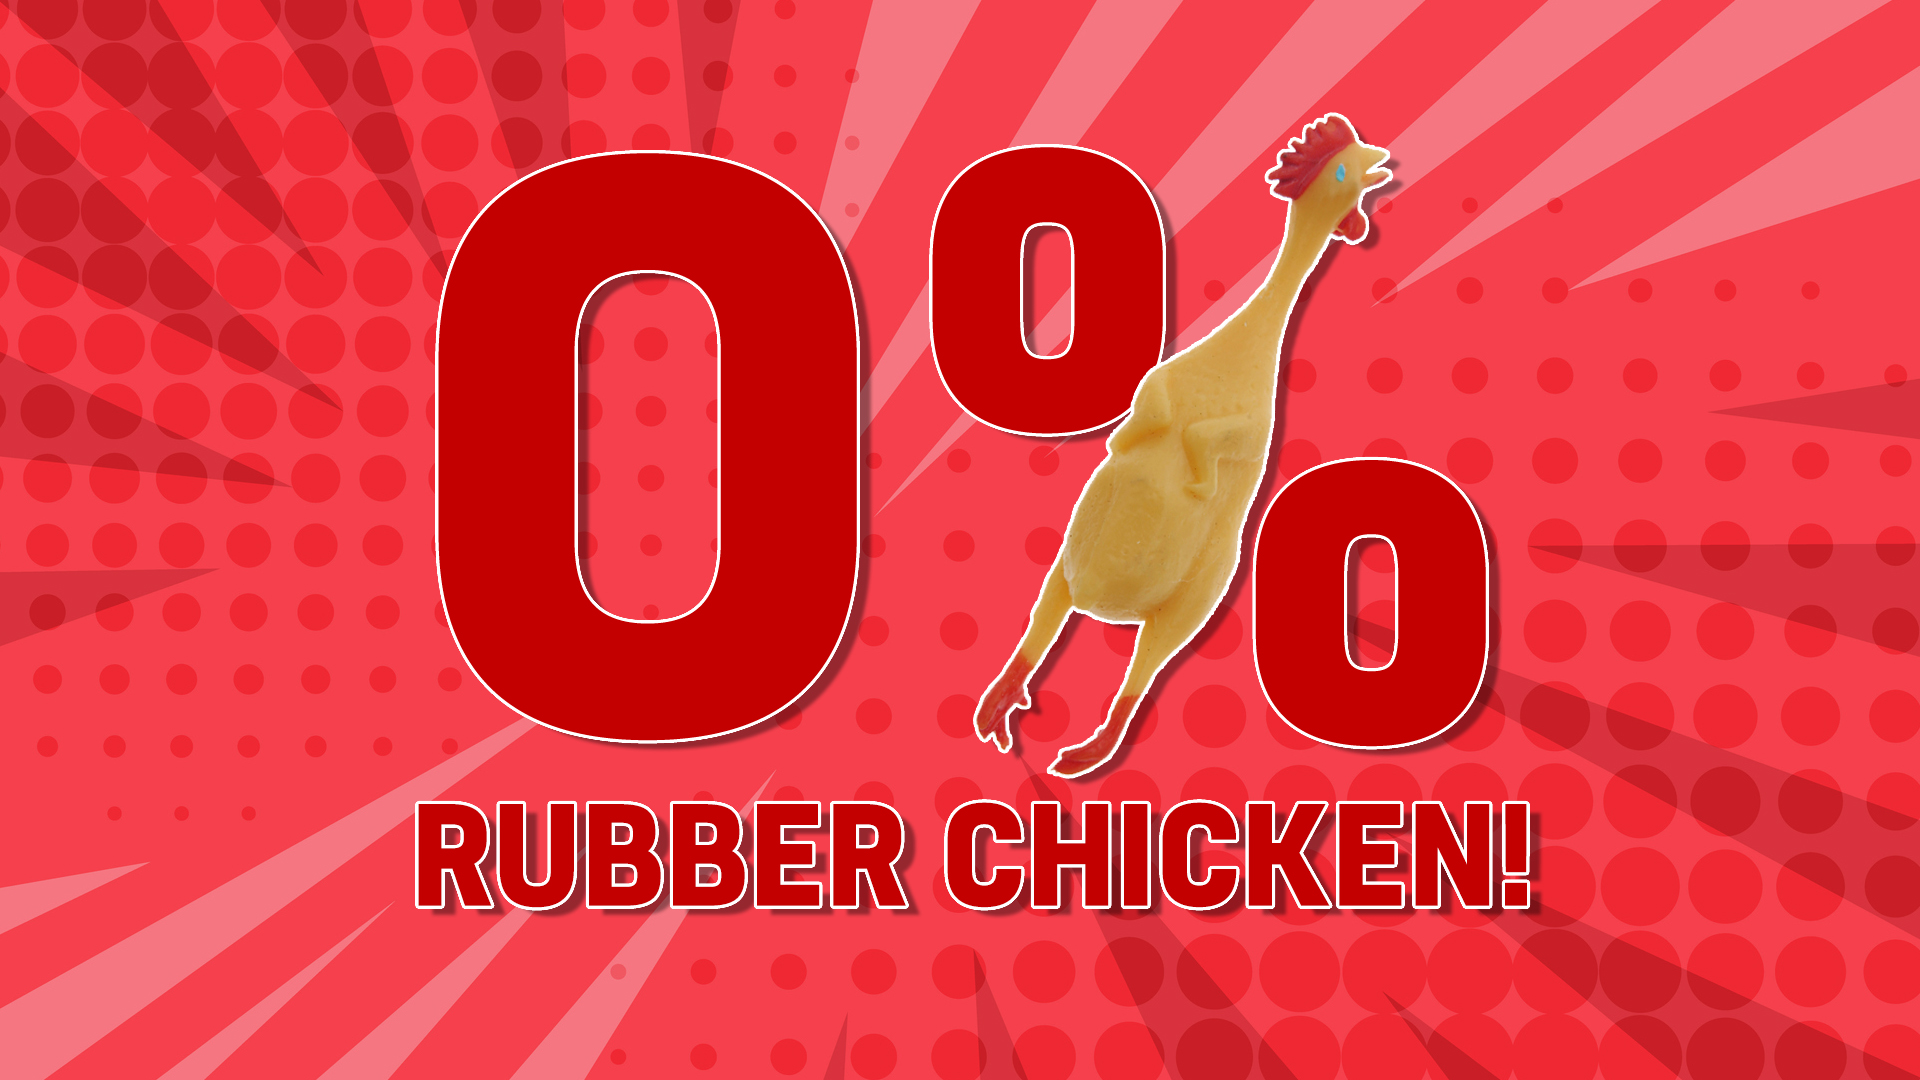 You are: 0% RUBBER CHICKEN!